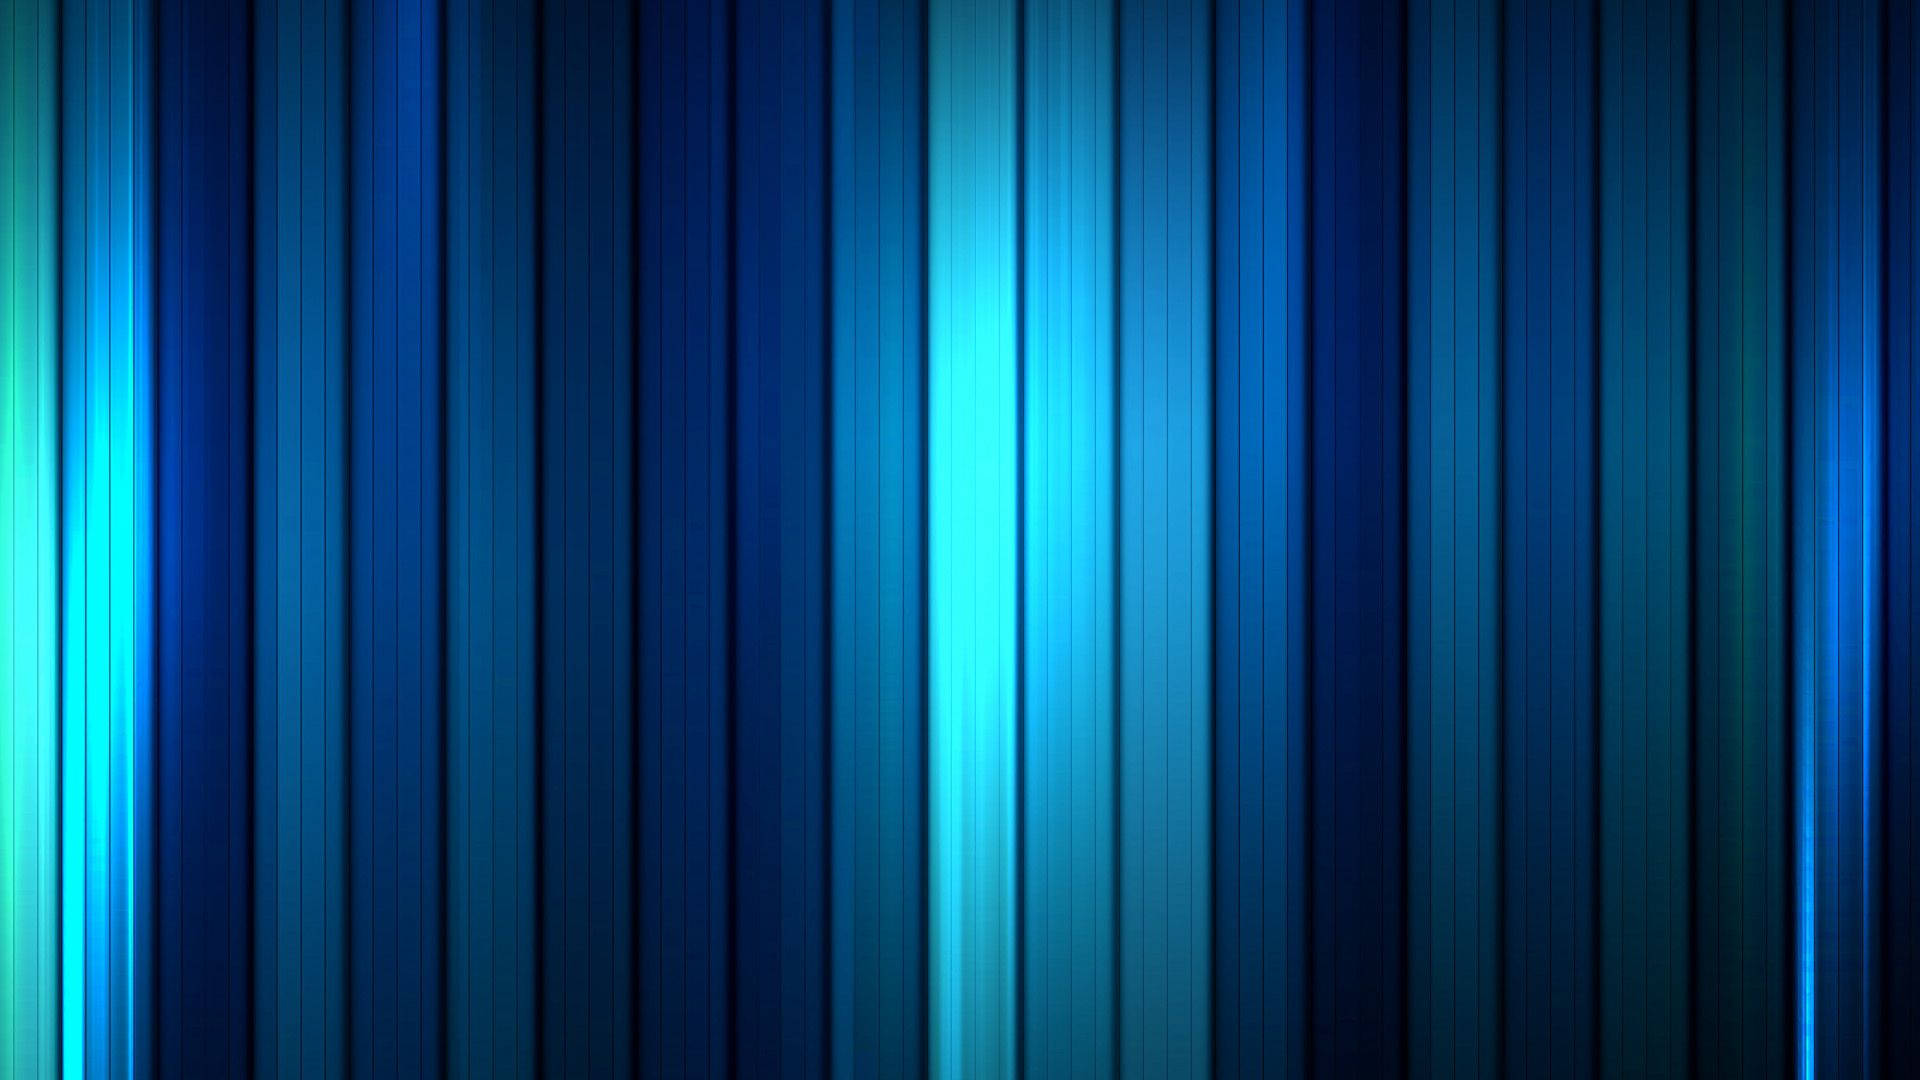 Blue And White Striped Wallpaper Wallpaper